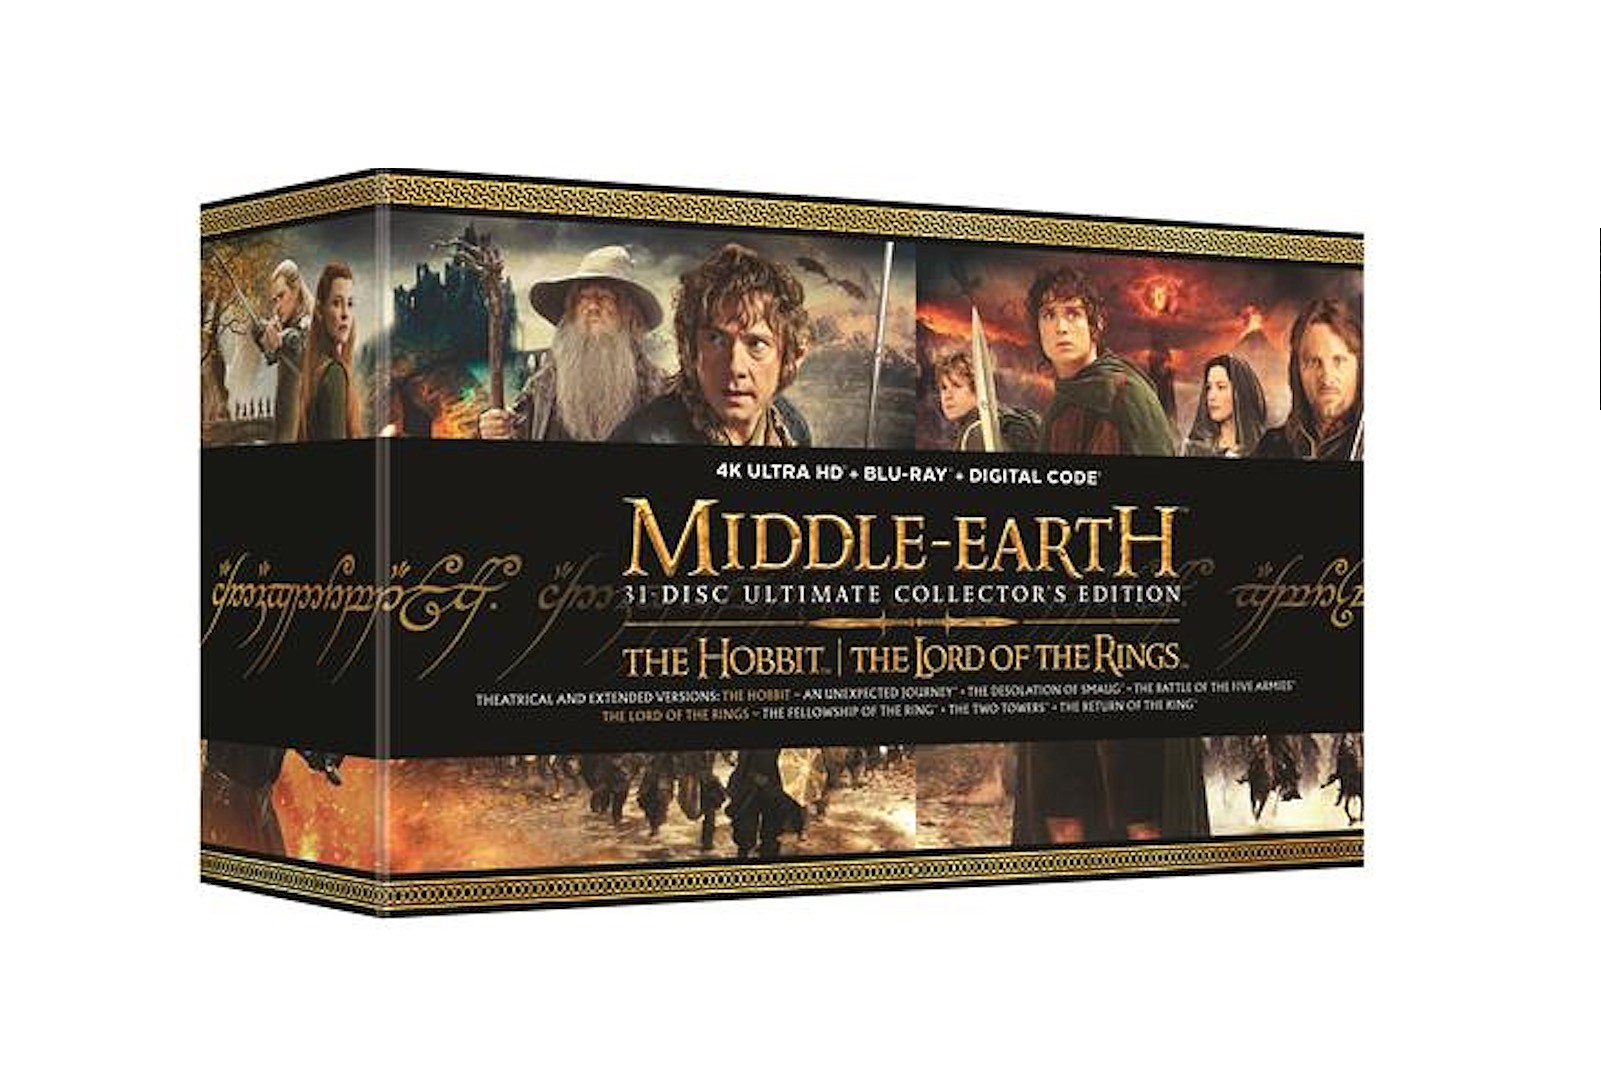 Peter Jackson's Middle-Earth Movies Get Gigantic 31-Disc Box Set